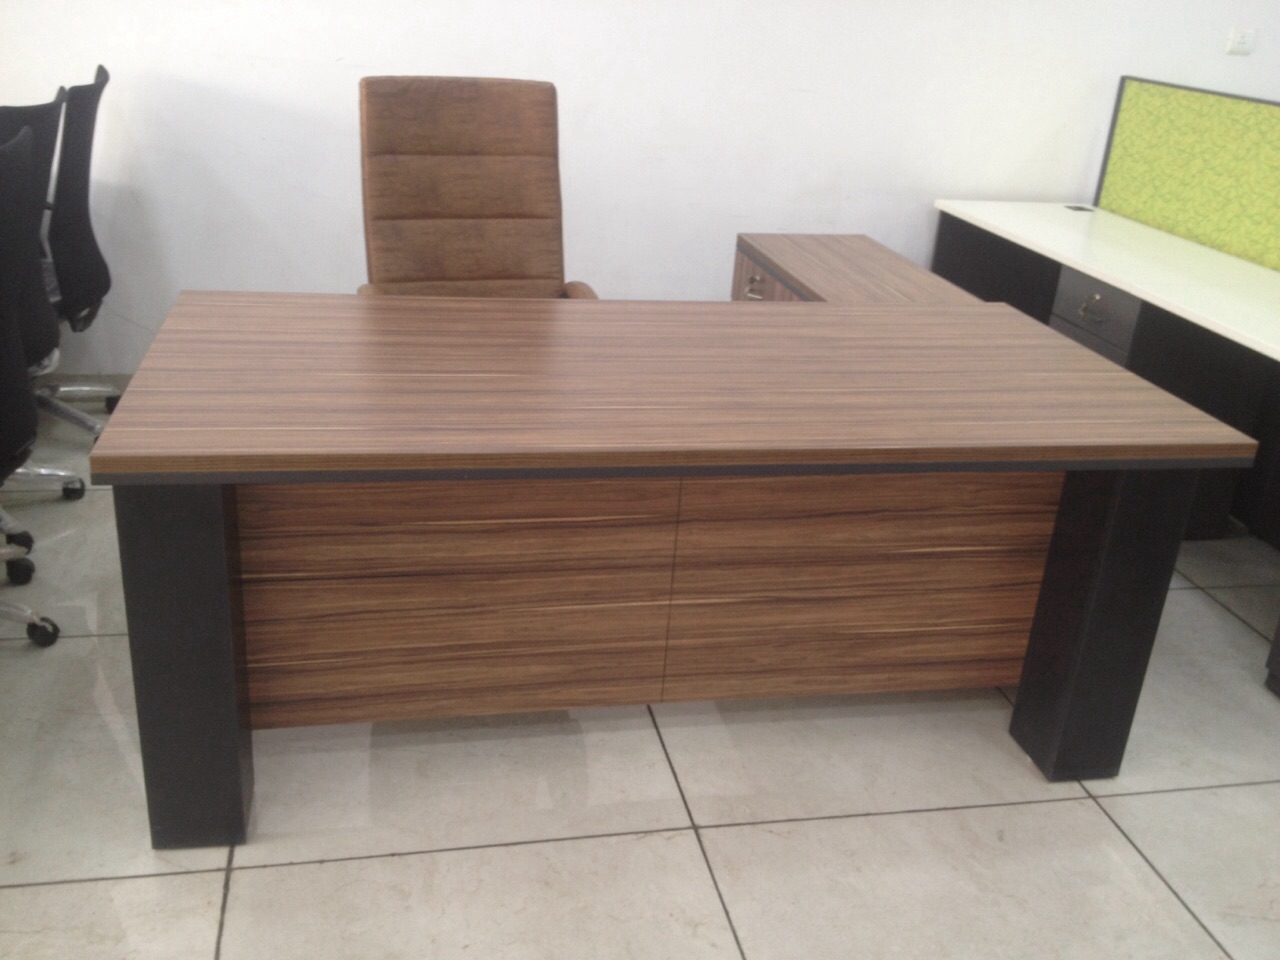 High Quality Office Table, Premium Director Table wooden design ...